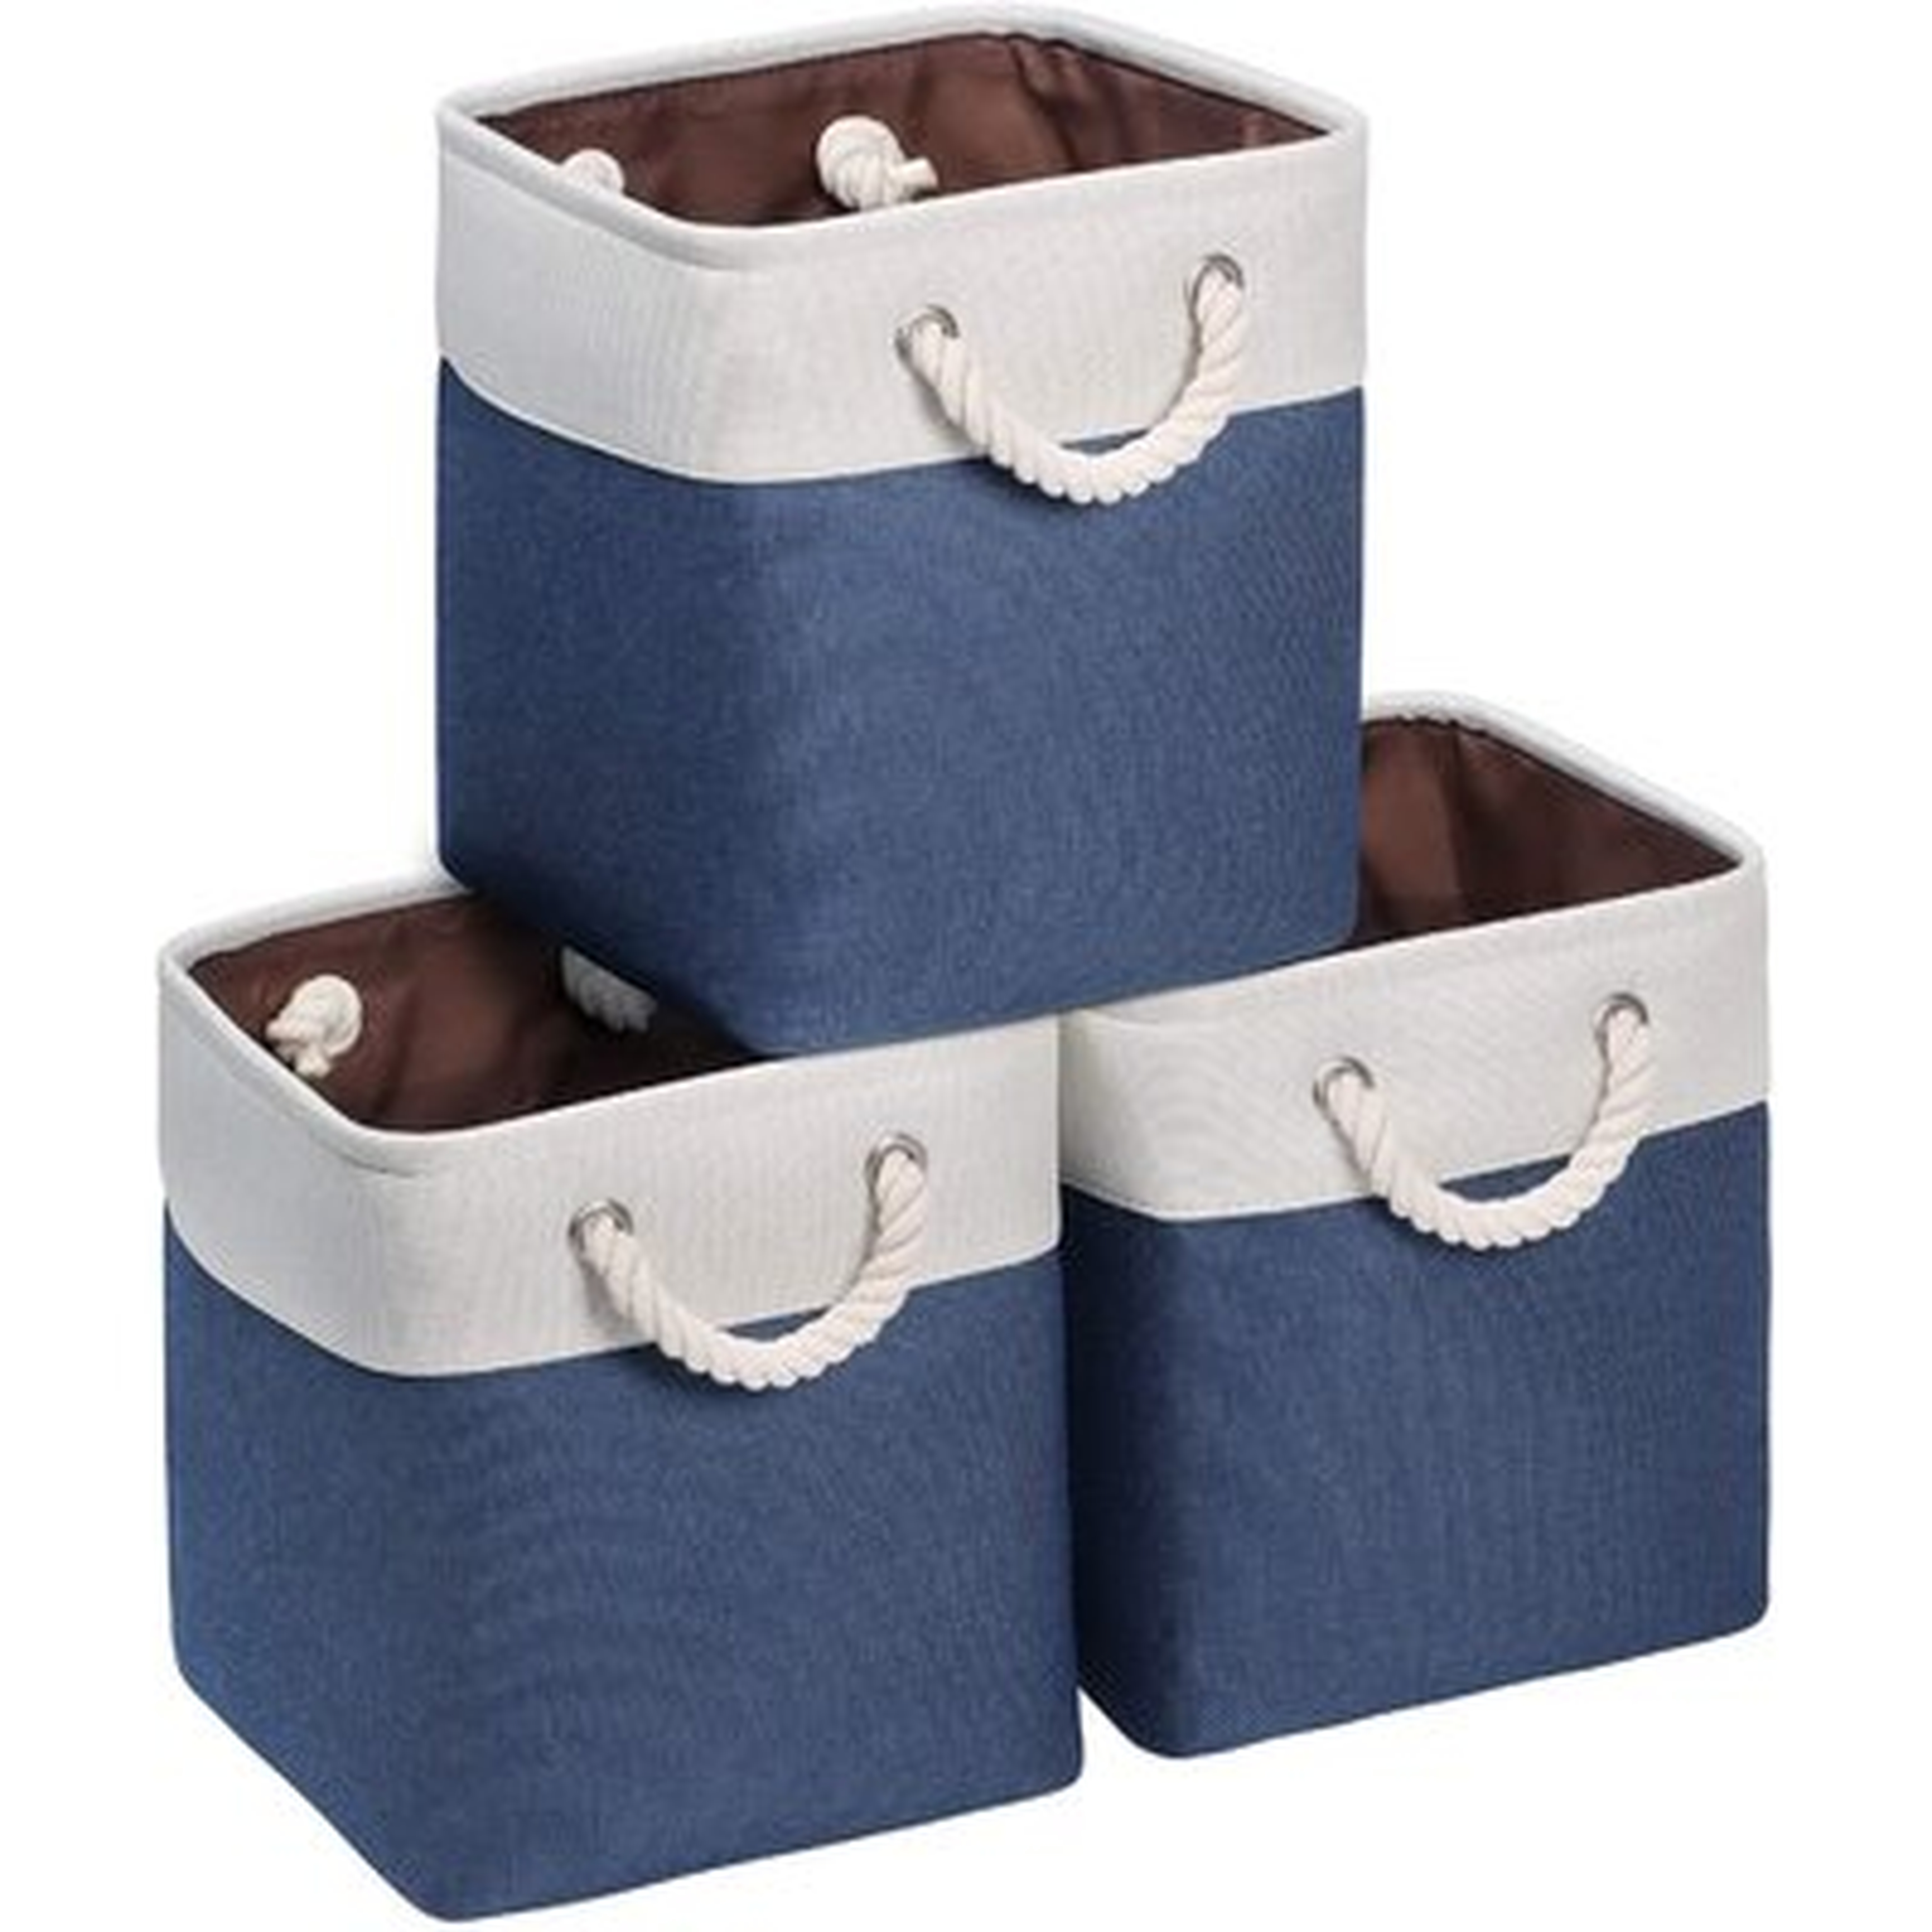 Storage Cubes 10.5'' X 10.5'' X 11''Fabric Baskets For Storage With Cotton Rope Handles Storage Bins For Cube Organizer For Shelves Closet Nursery Navy Bule & White Set Of 3 - Wayfair